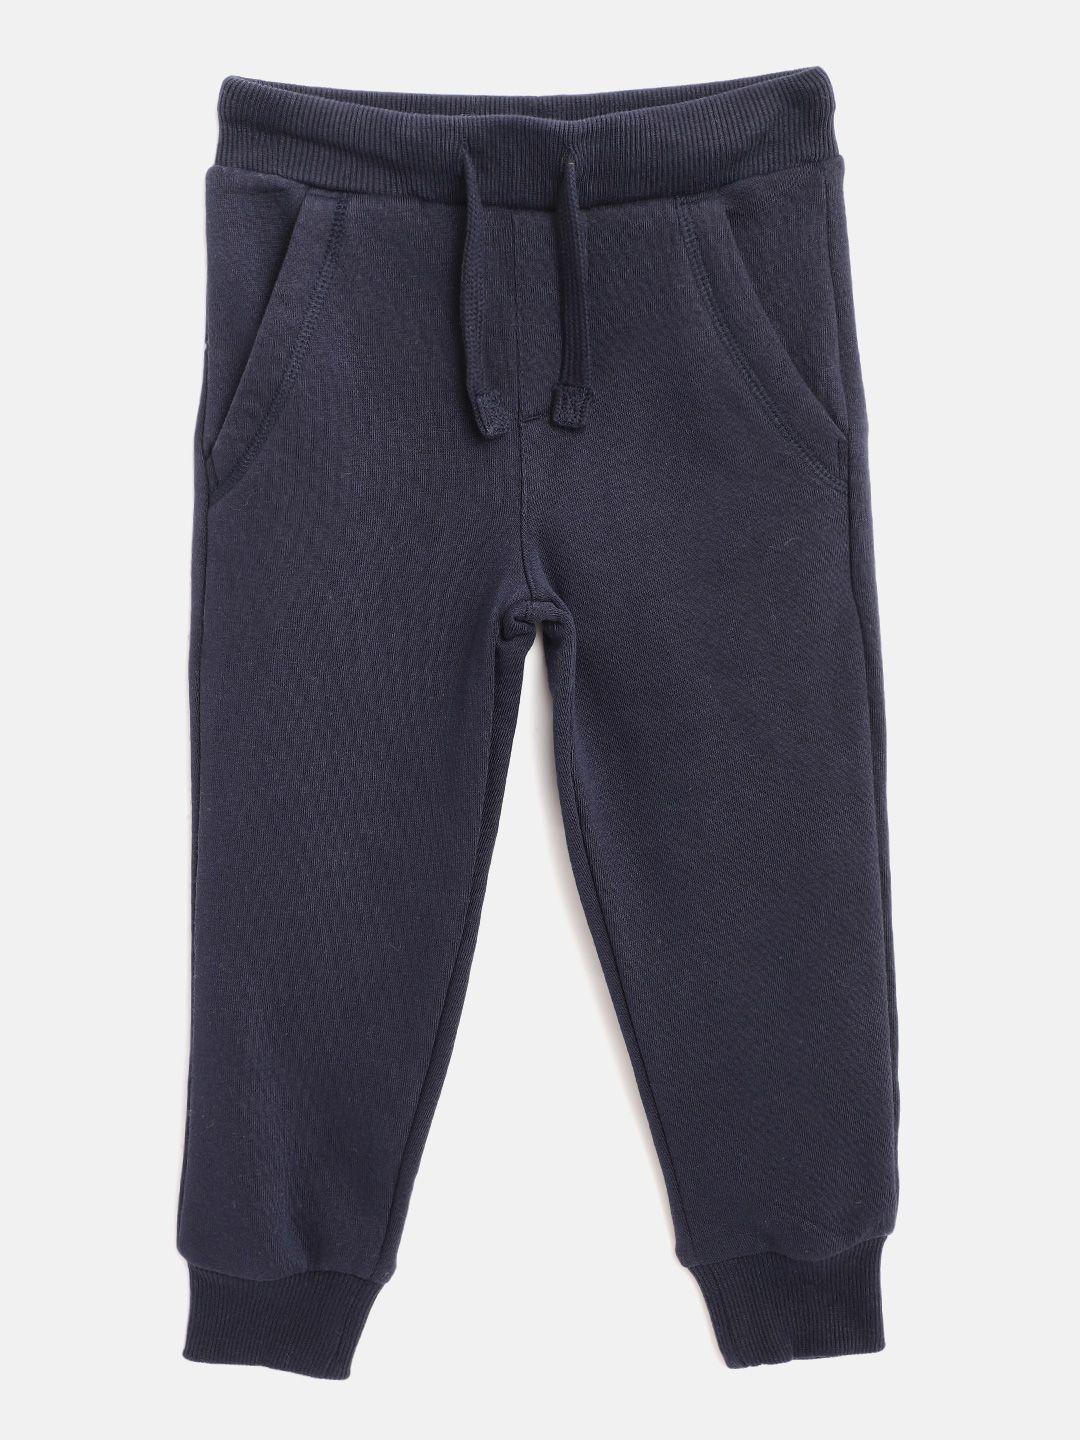 Marks & Spencer Boys Navy Blue Low-Rise Easy Wash Joggers Trousers